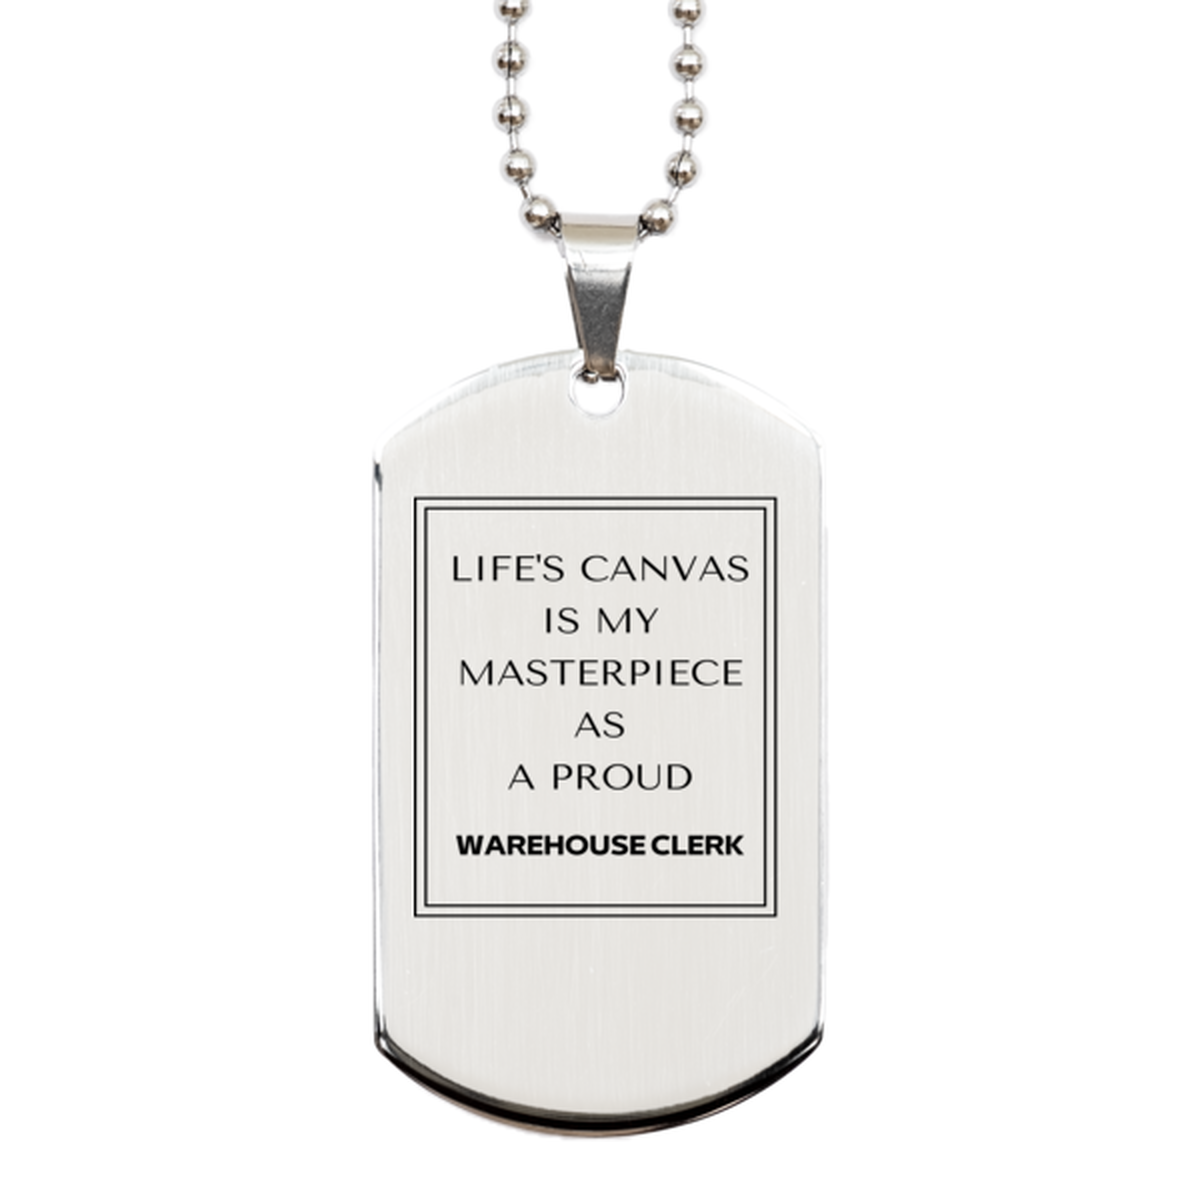 Proud Warehouse Clerk Gifts, Life's canvas is my masterpiece, Epic Birthday Christmas Unique Silver Dog Tag For Warehouse Clerk, Coworkers, Men, Women, Friends